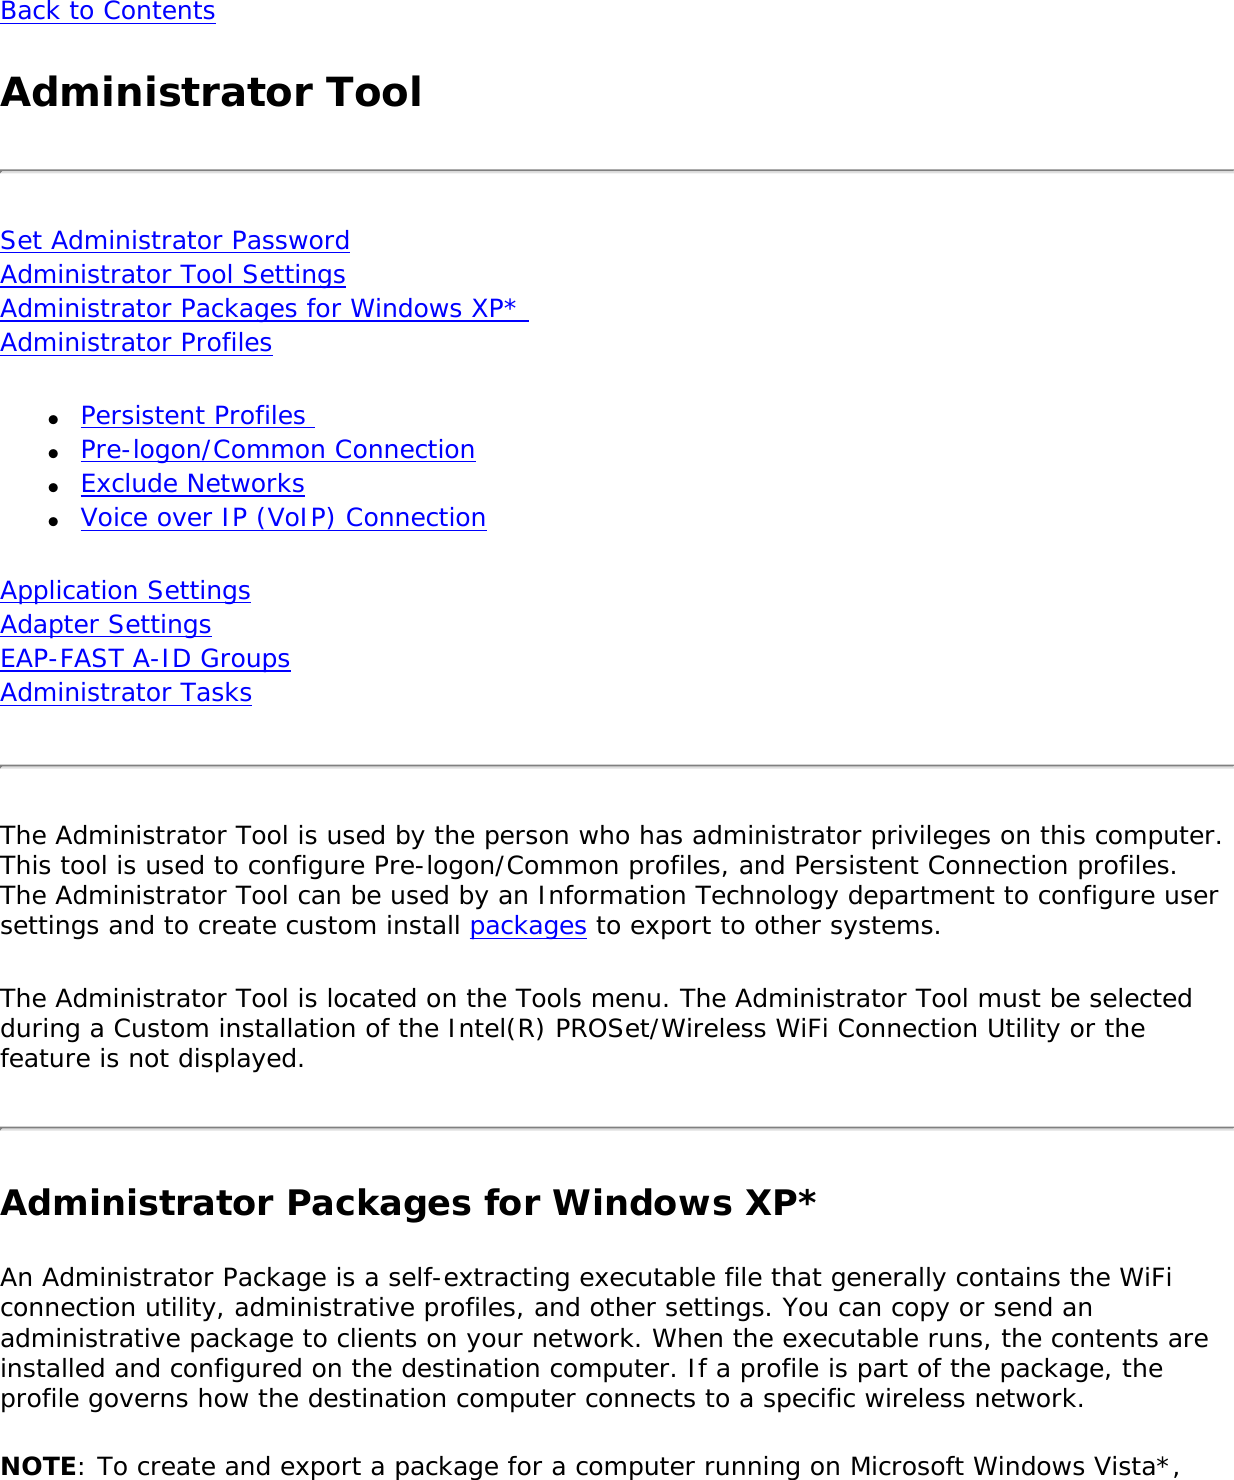 Back to ContentsAdministrator ToolSet Administrator Password Administrator Tool Settings Administrator Packages for Windows XP*  Administrator Profiles●     Persistent Profiles ●     Pre-logon/Common Connection●     Exclude Networks●     Voice over IP (VoIP) ConnectionApplication Settings Adapter Settings EAP-FAST A-ID Groups Administrator Tasks The Administrator Tool is used by the person who has administrator privileges on this computer. This tool is used to configure Pre-logon/Common profiles, and Persistent Connection profiles. The Administrator Tool can be used by an Information Technology department to configure user settings and to create custom install packages to export to other systems.The Administrator Tool is located on the Tools menu. The Administrator Tool must be selected during a Custom installation of the Intel(R) PROSet/Wireless WiFi Connection Utility or the feature is not displayed.Administrator Packages for Windows XP*An Administrator Package is a self-extracting executable file that generally contains the WiFi connection utility, administrative profiles, and other settings. You can copy or send an administrative package to clients on your network. When the executable runs, the contents are installed and configured on the destination computer. If a profile is part of the package, the profile governs how the destination computer connects to a specific wireless network.NOTE: To create and export a package for a computer running on Microsoft Windows Vista*, 